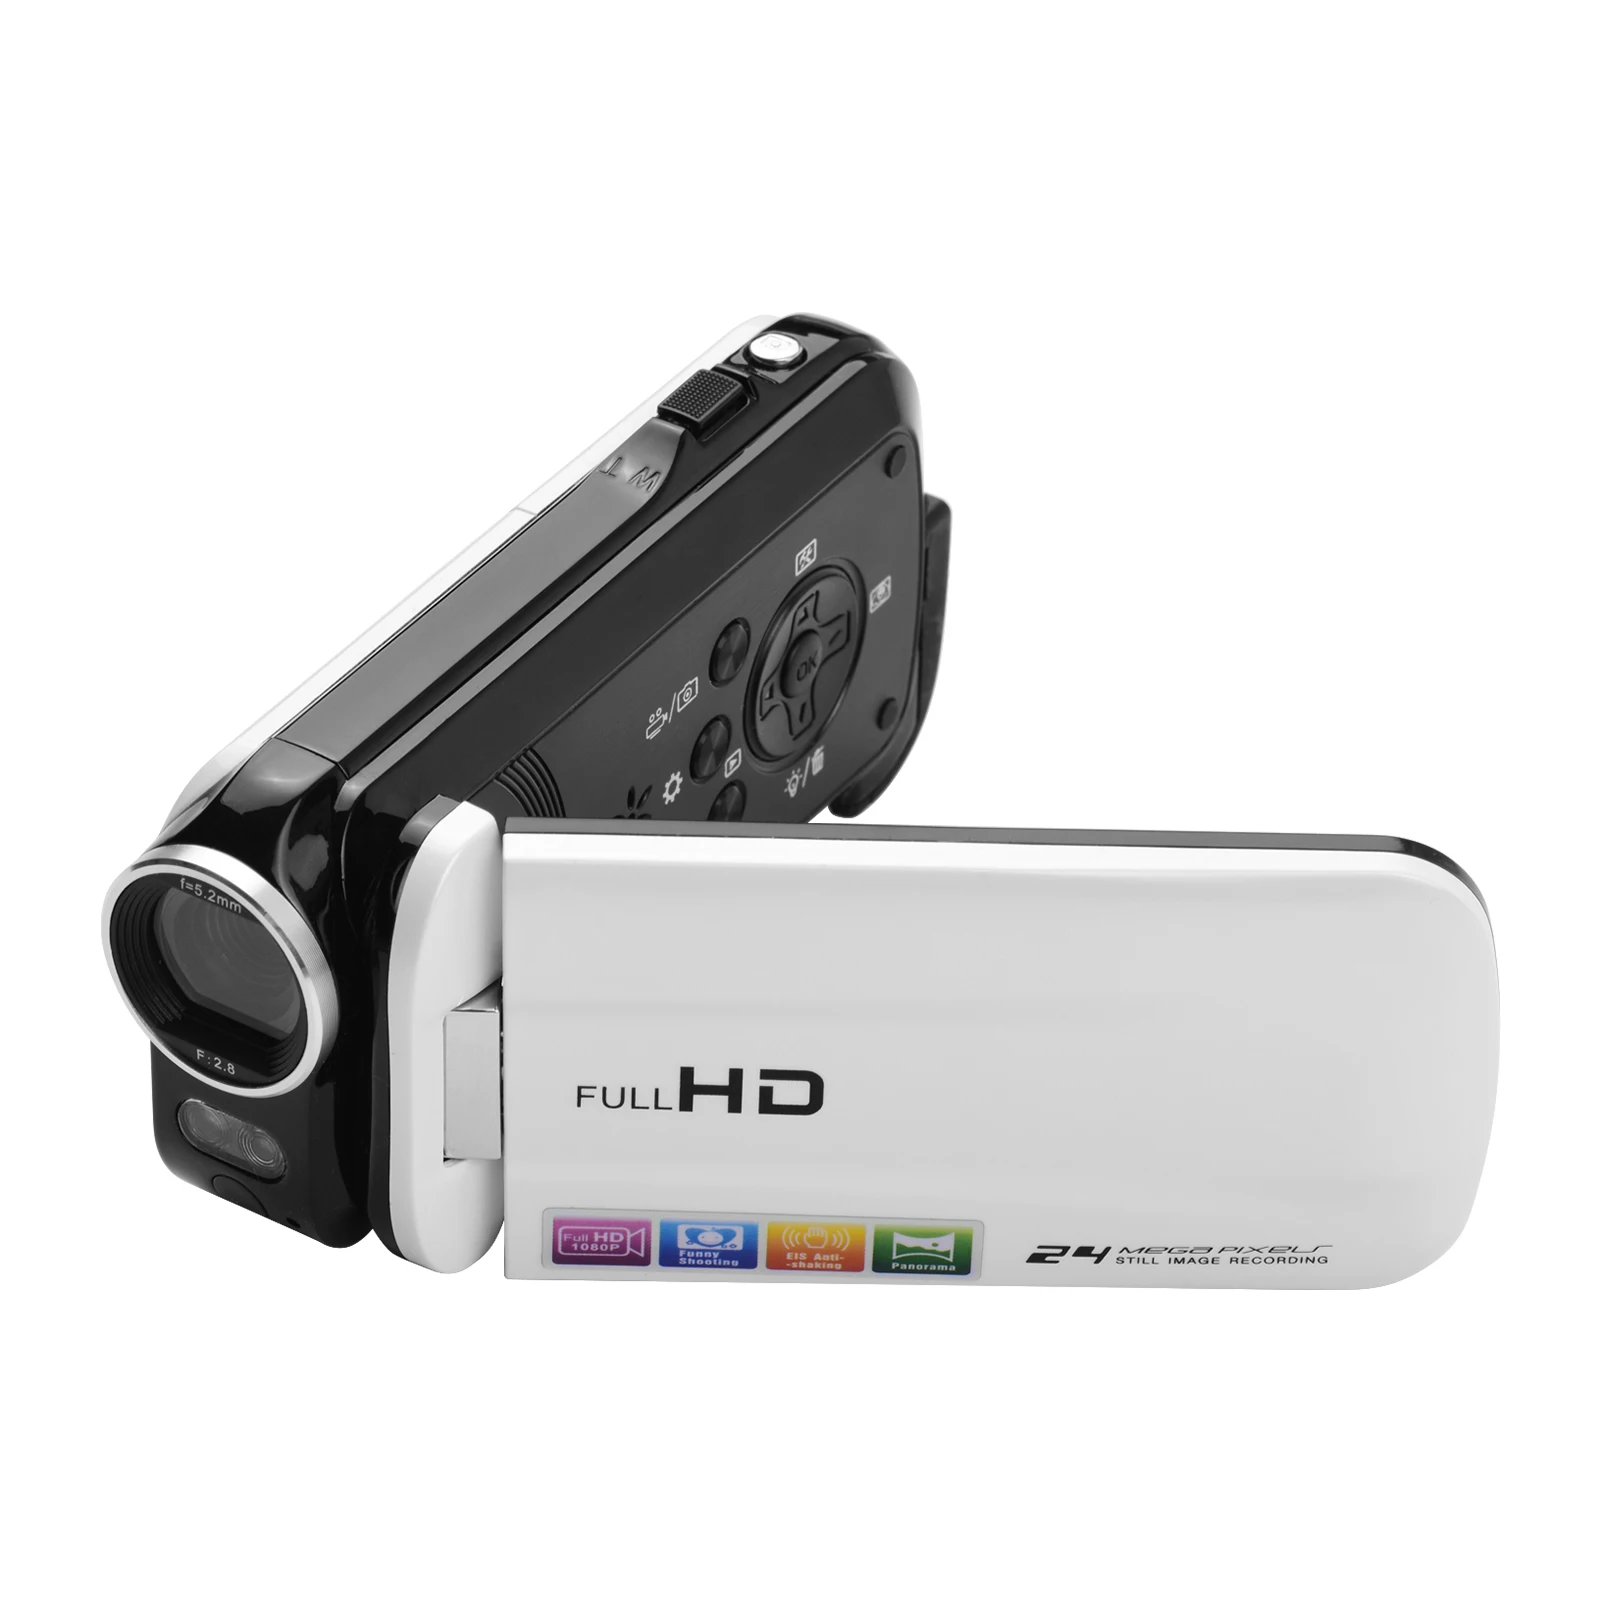 1080p-full-hd-mini-digital-video-camera-dv-camcorder-24mp-3-inch-rotatable-lcd-touchscreen-18x-zoom-built-in-led-fill-in-light